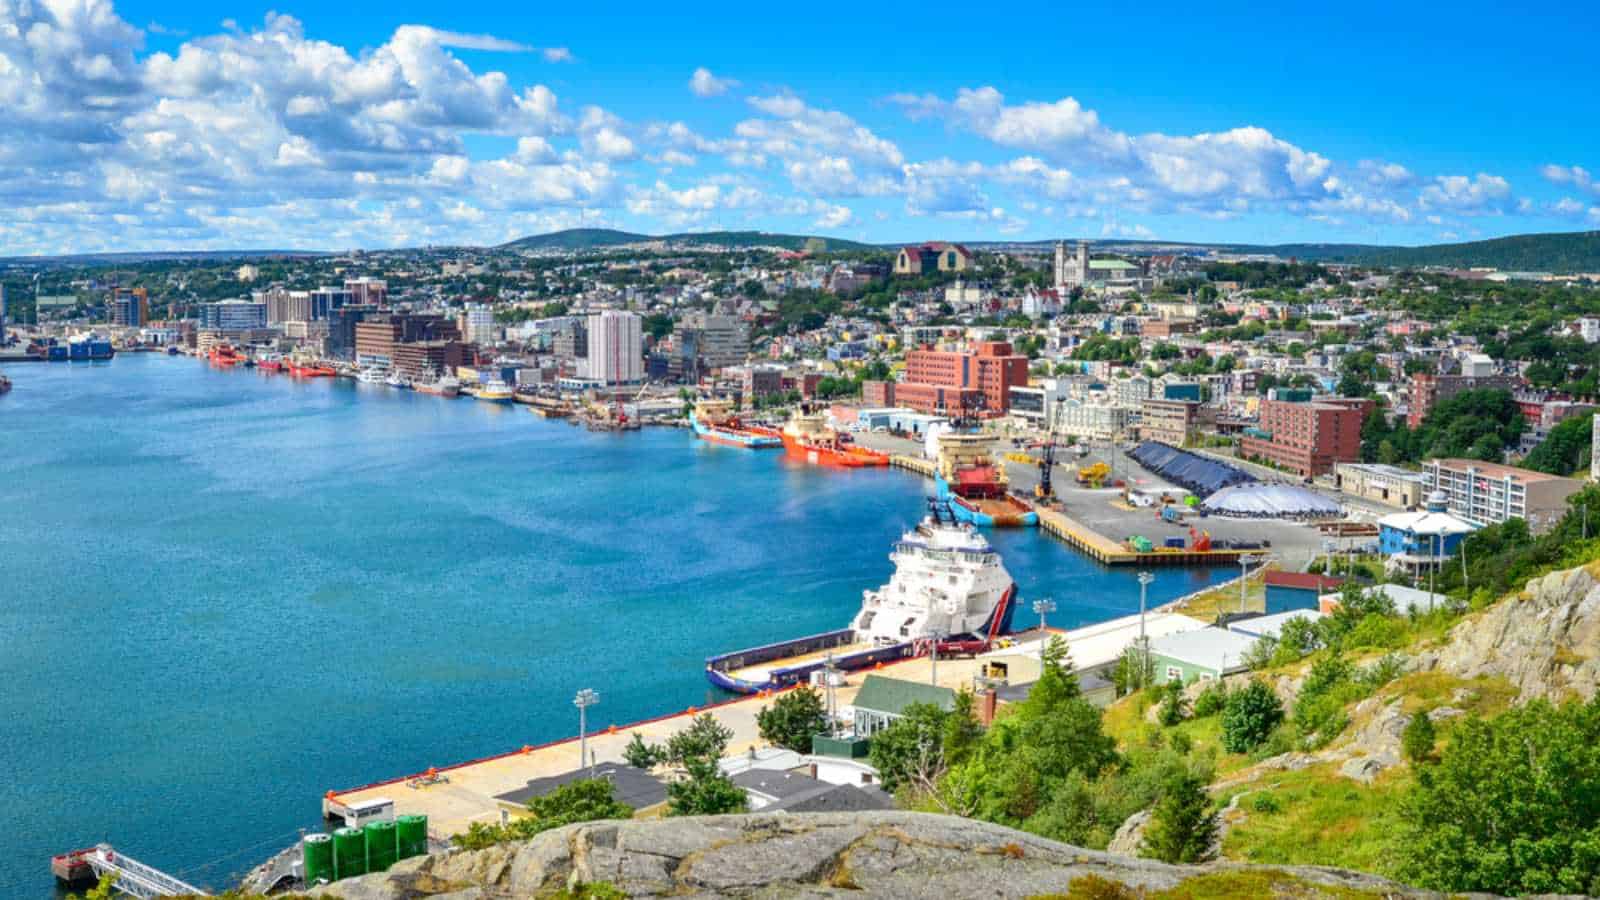 Panoramic views with bight blue summer day sky with puffy clouds over the harbor and city of St. John's NewFoundland, Canada.